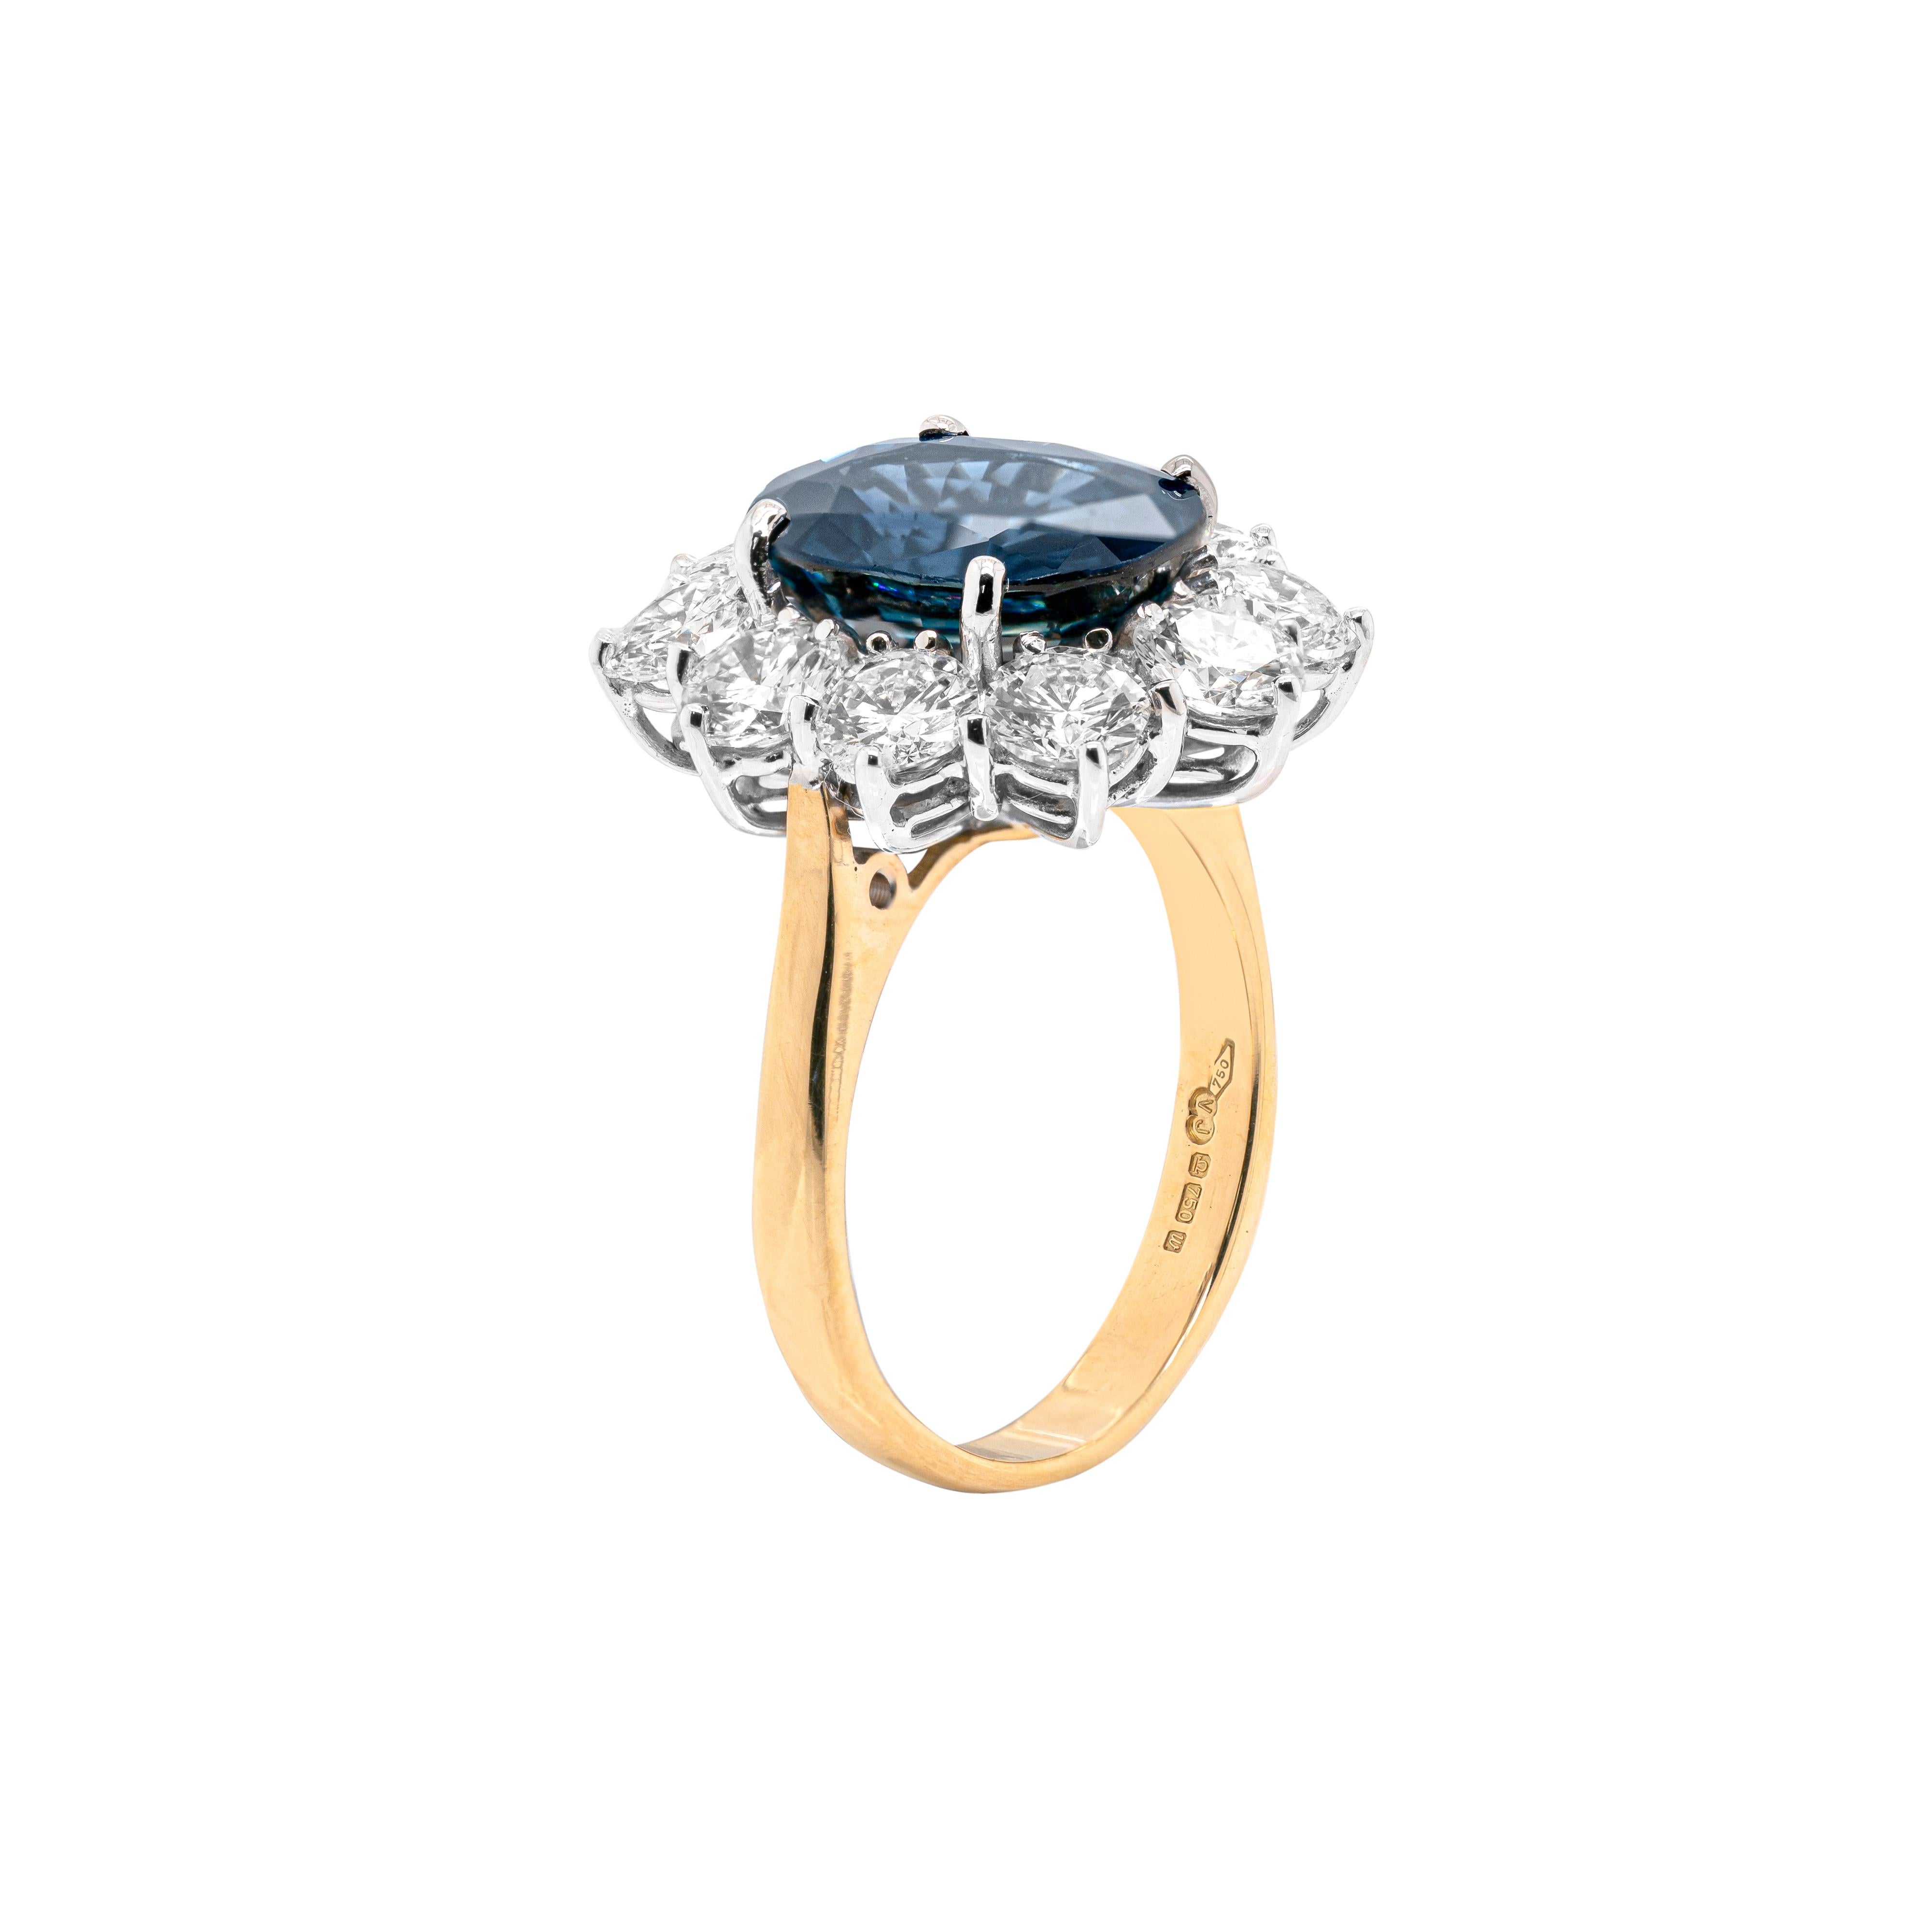 This incredible engagement cluster ring features a wonderful oval shaped blue sapphire weighing 5.03 carats, in a four claw, open back setting. The impressive stone is beautifully surrounded by ten round brilliant cut diamonds weighing a total